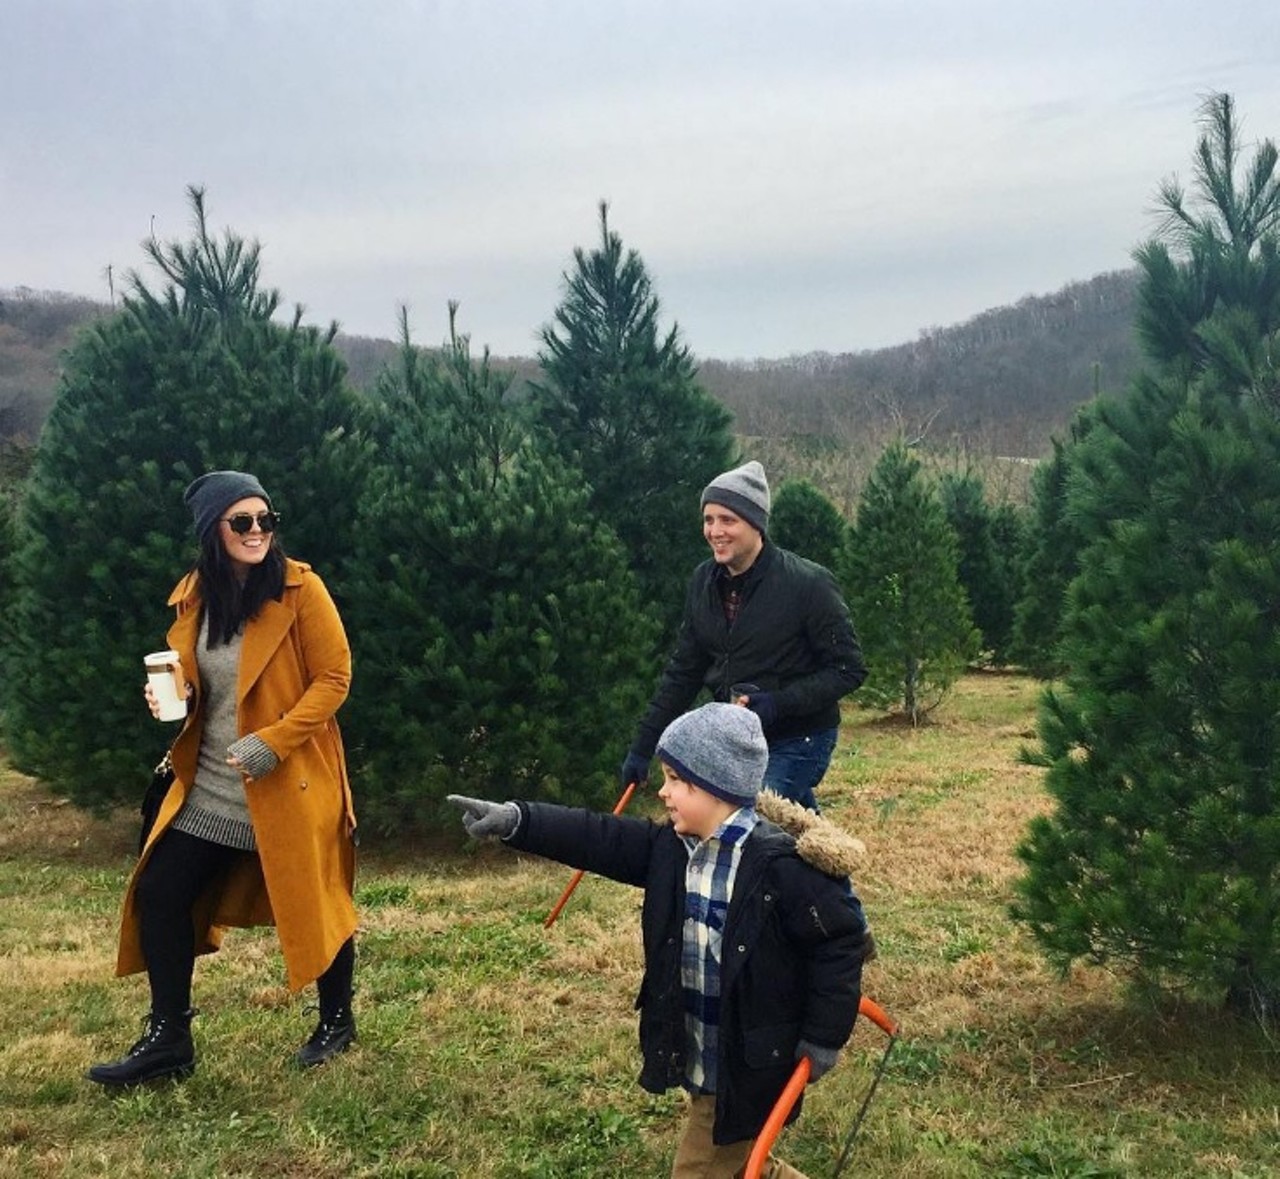 Pea Ridge Forest
22735 Tree Farm Rd. 
Hermann, MO 65041
(636) 932-4687
This family-owned and operated tree farm has it all for the perfect Christmas outing, including a hayride out to the fields, the opportunity to cut your own Christmas tree and homemade baked goods. And, yes, you can indulge in a little wine from the area wineries while you're there. Merry Christmas indeed. Photo courtesy of Instagram / megebaughfaris.